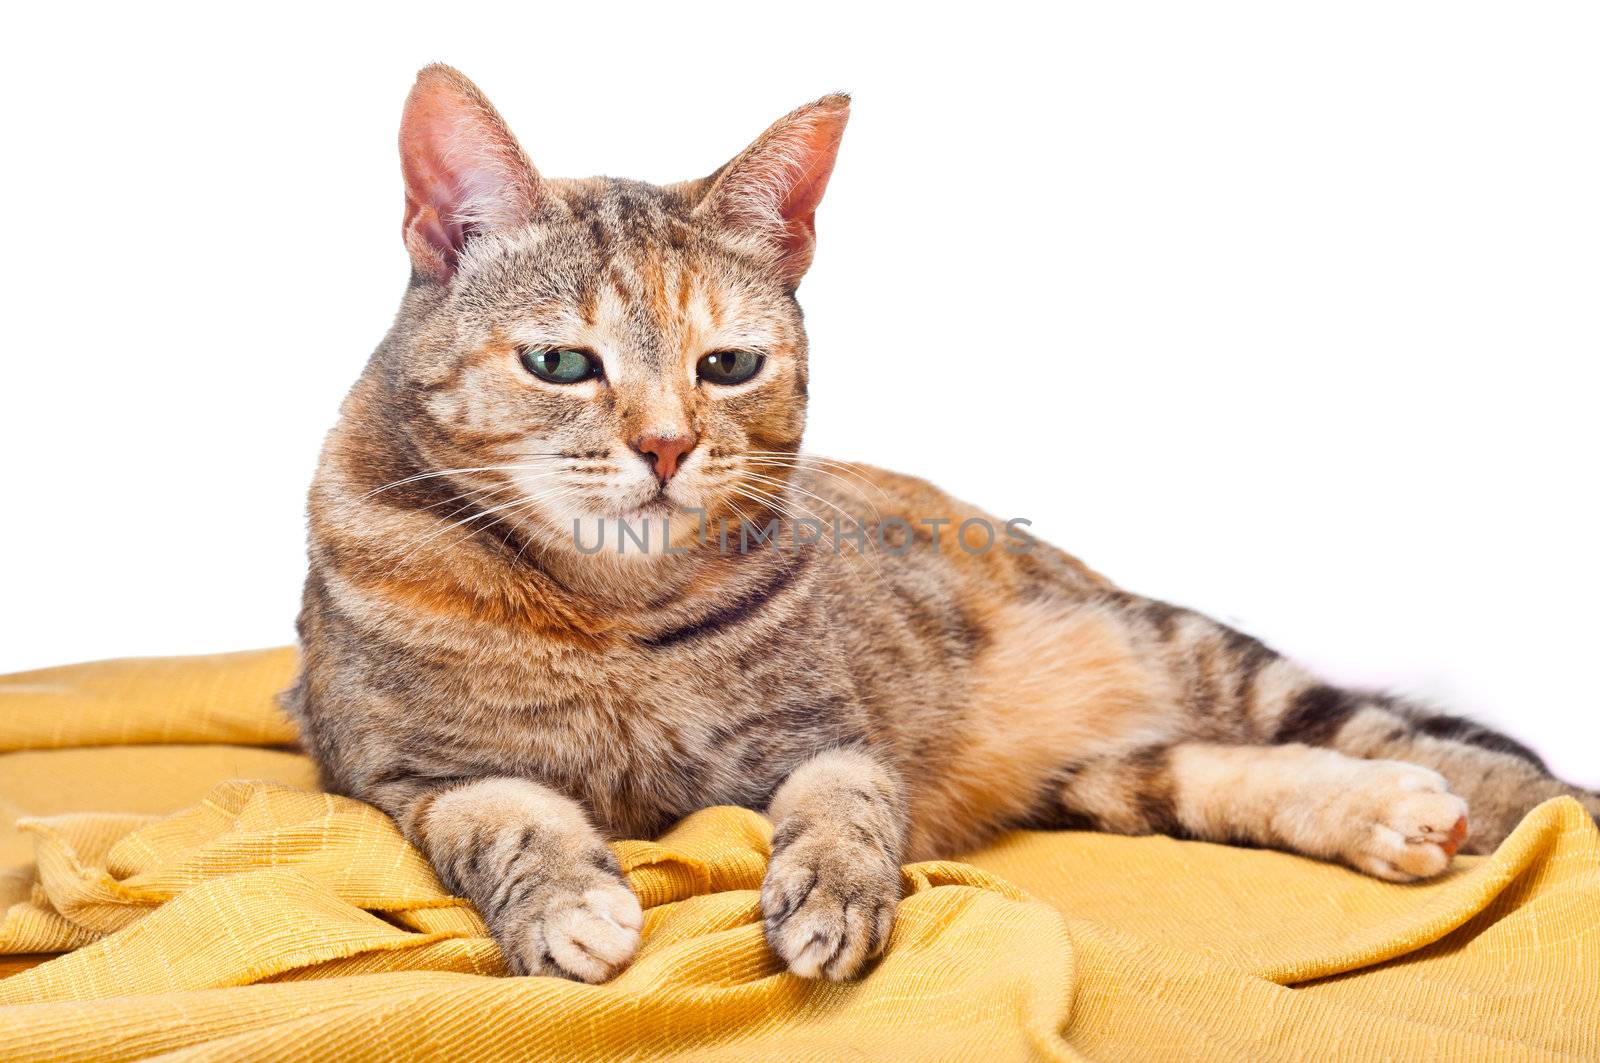 Cat on Golden Fabric by timh